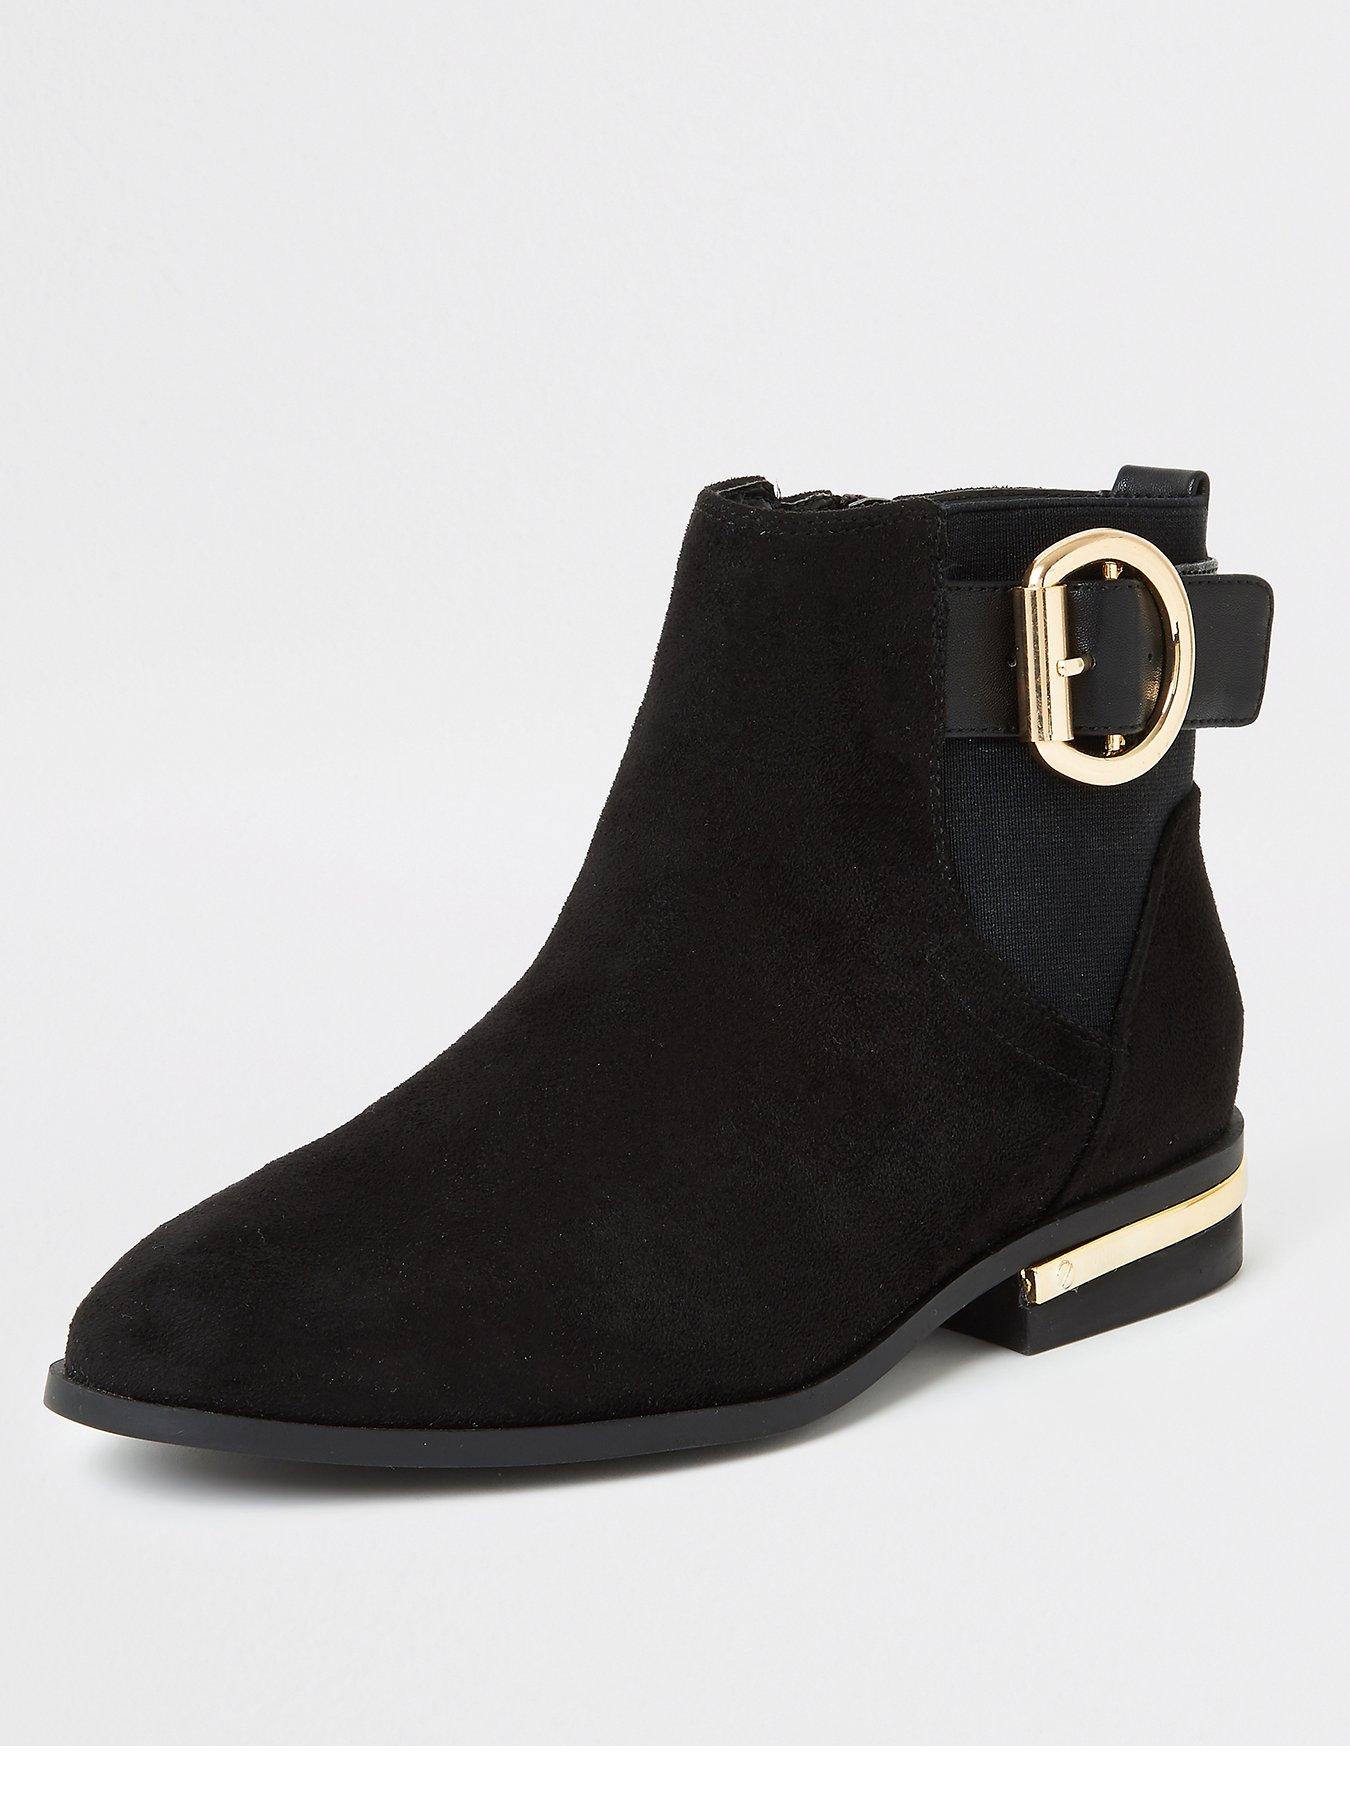 black suede flat ankle boots uk